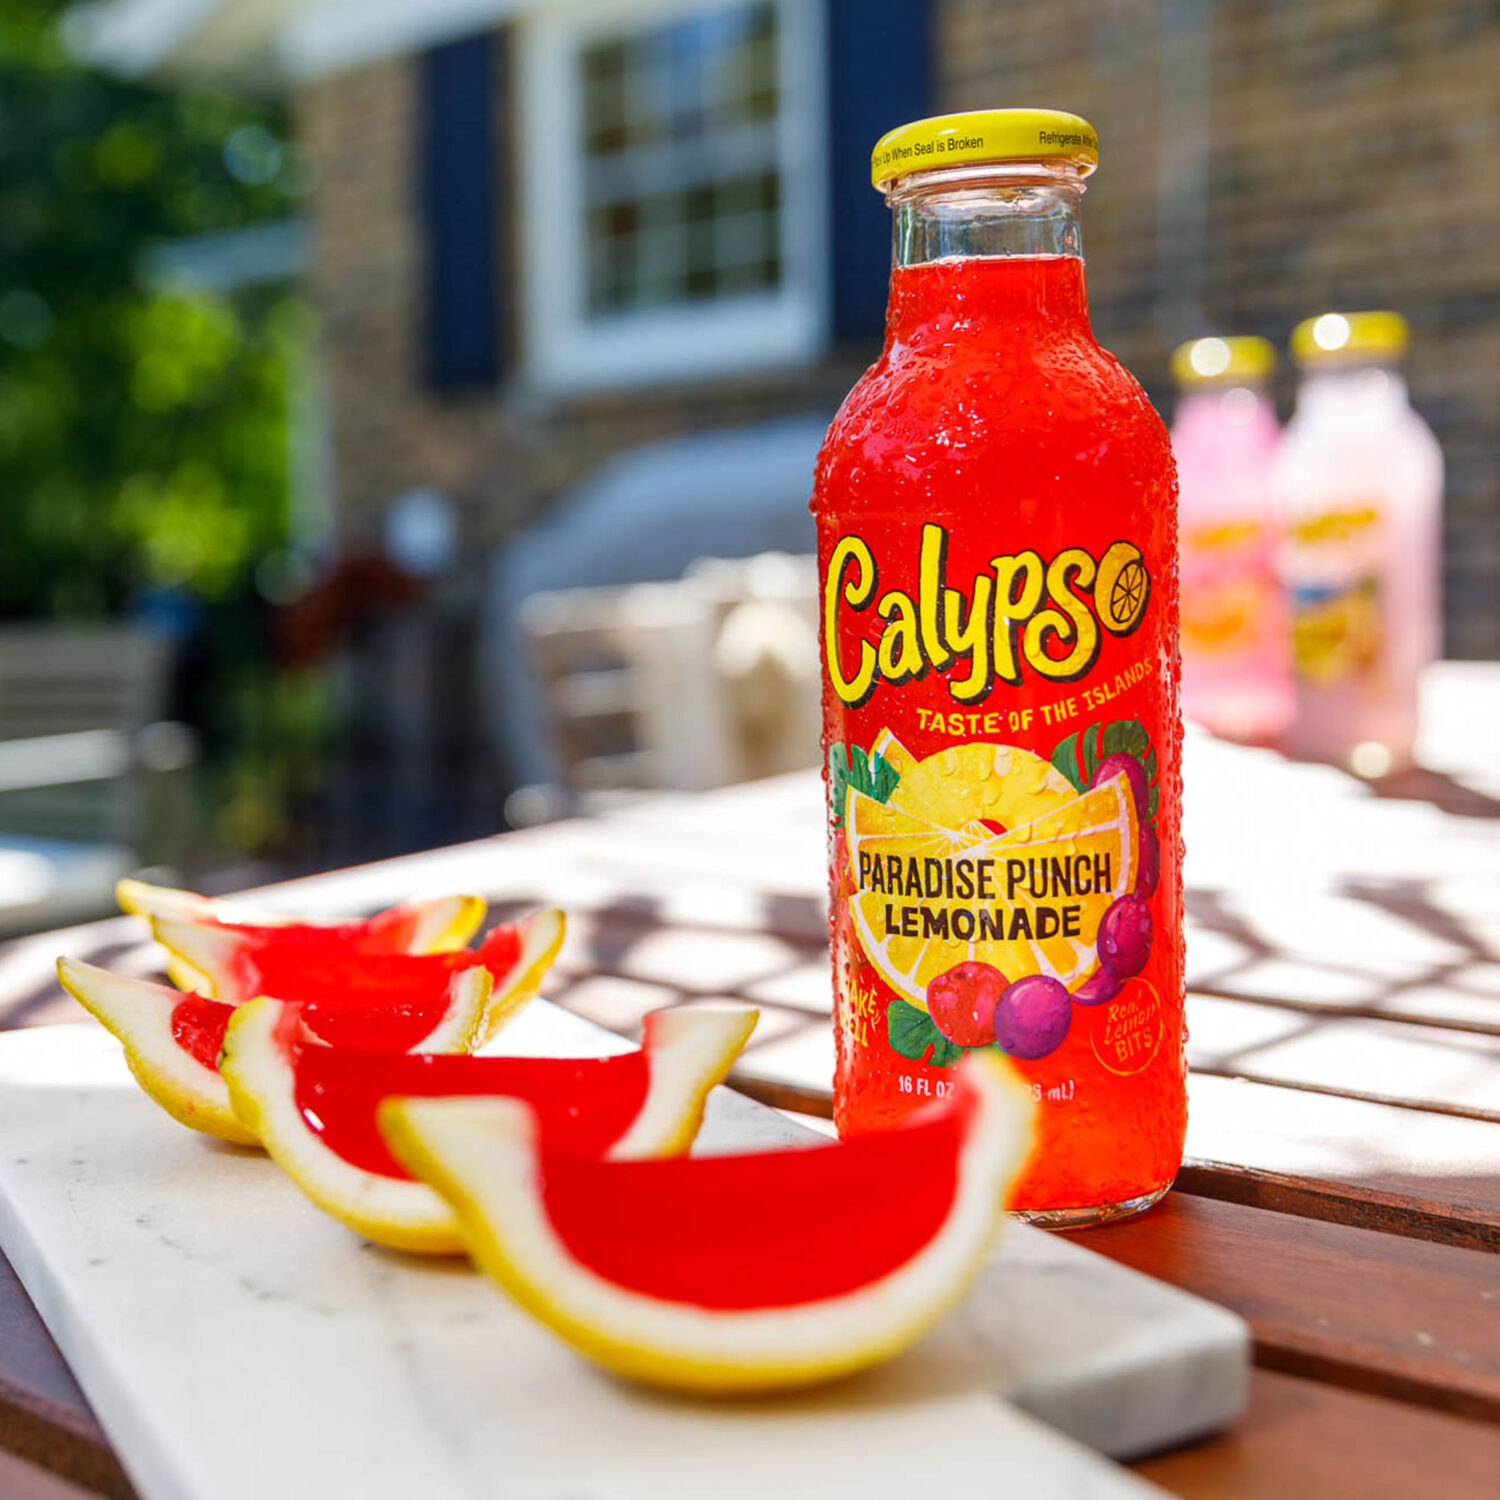 A bottle of Calypso Paradise Punch Lemonade sits on a table next to jello slices in lemon peels.